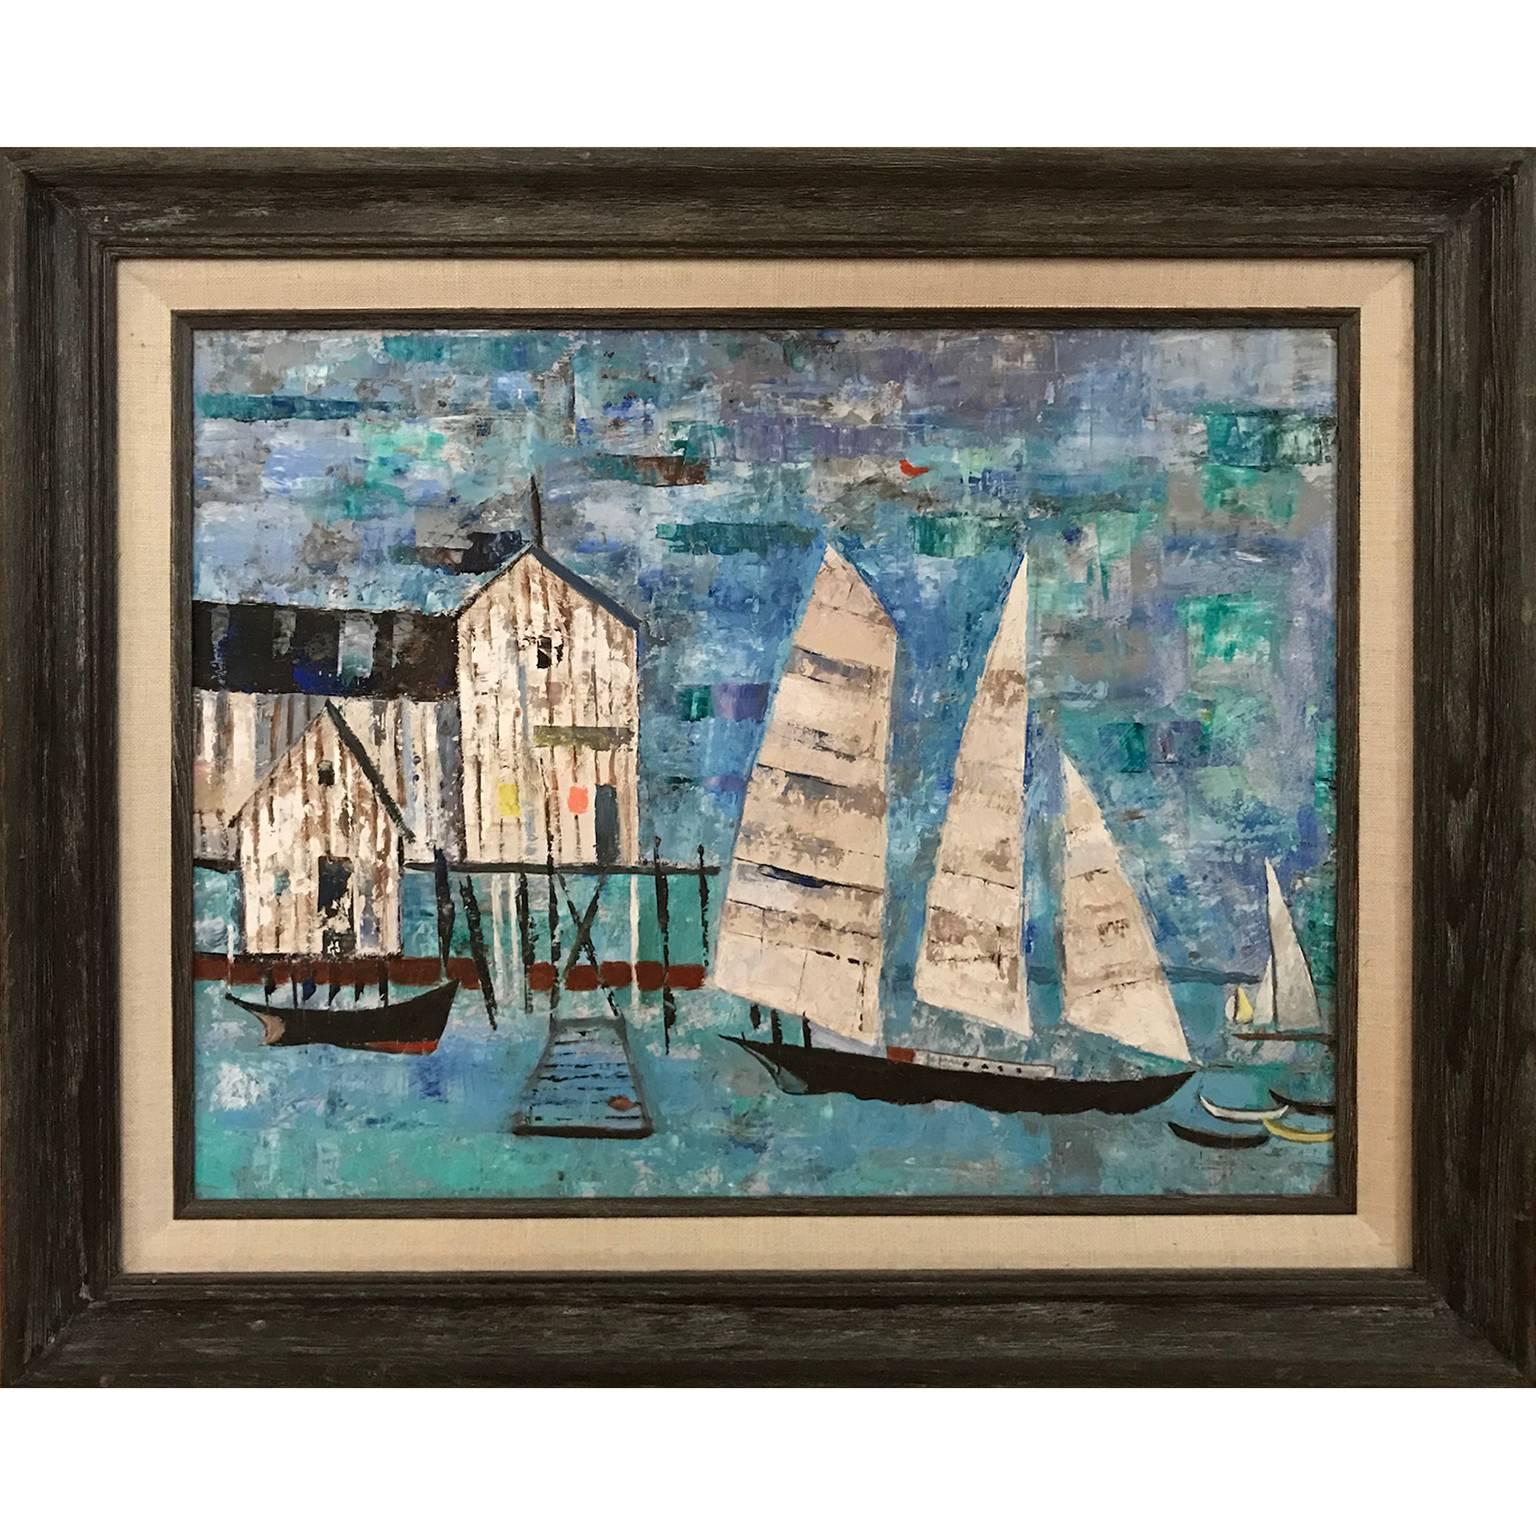 Chester Dixon Snowden Landscape Painting - Cool-Colored Abstract Expressionist Sailboats and Boat House